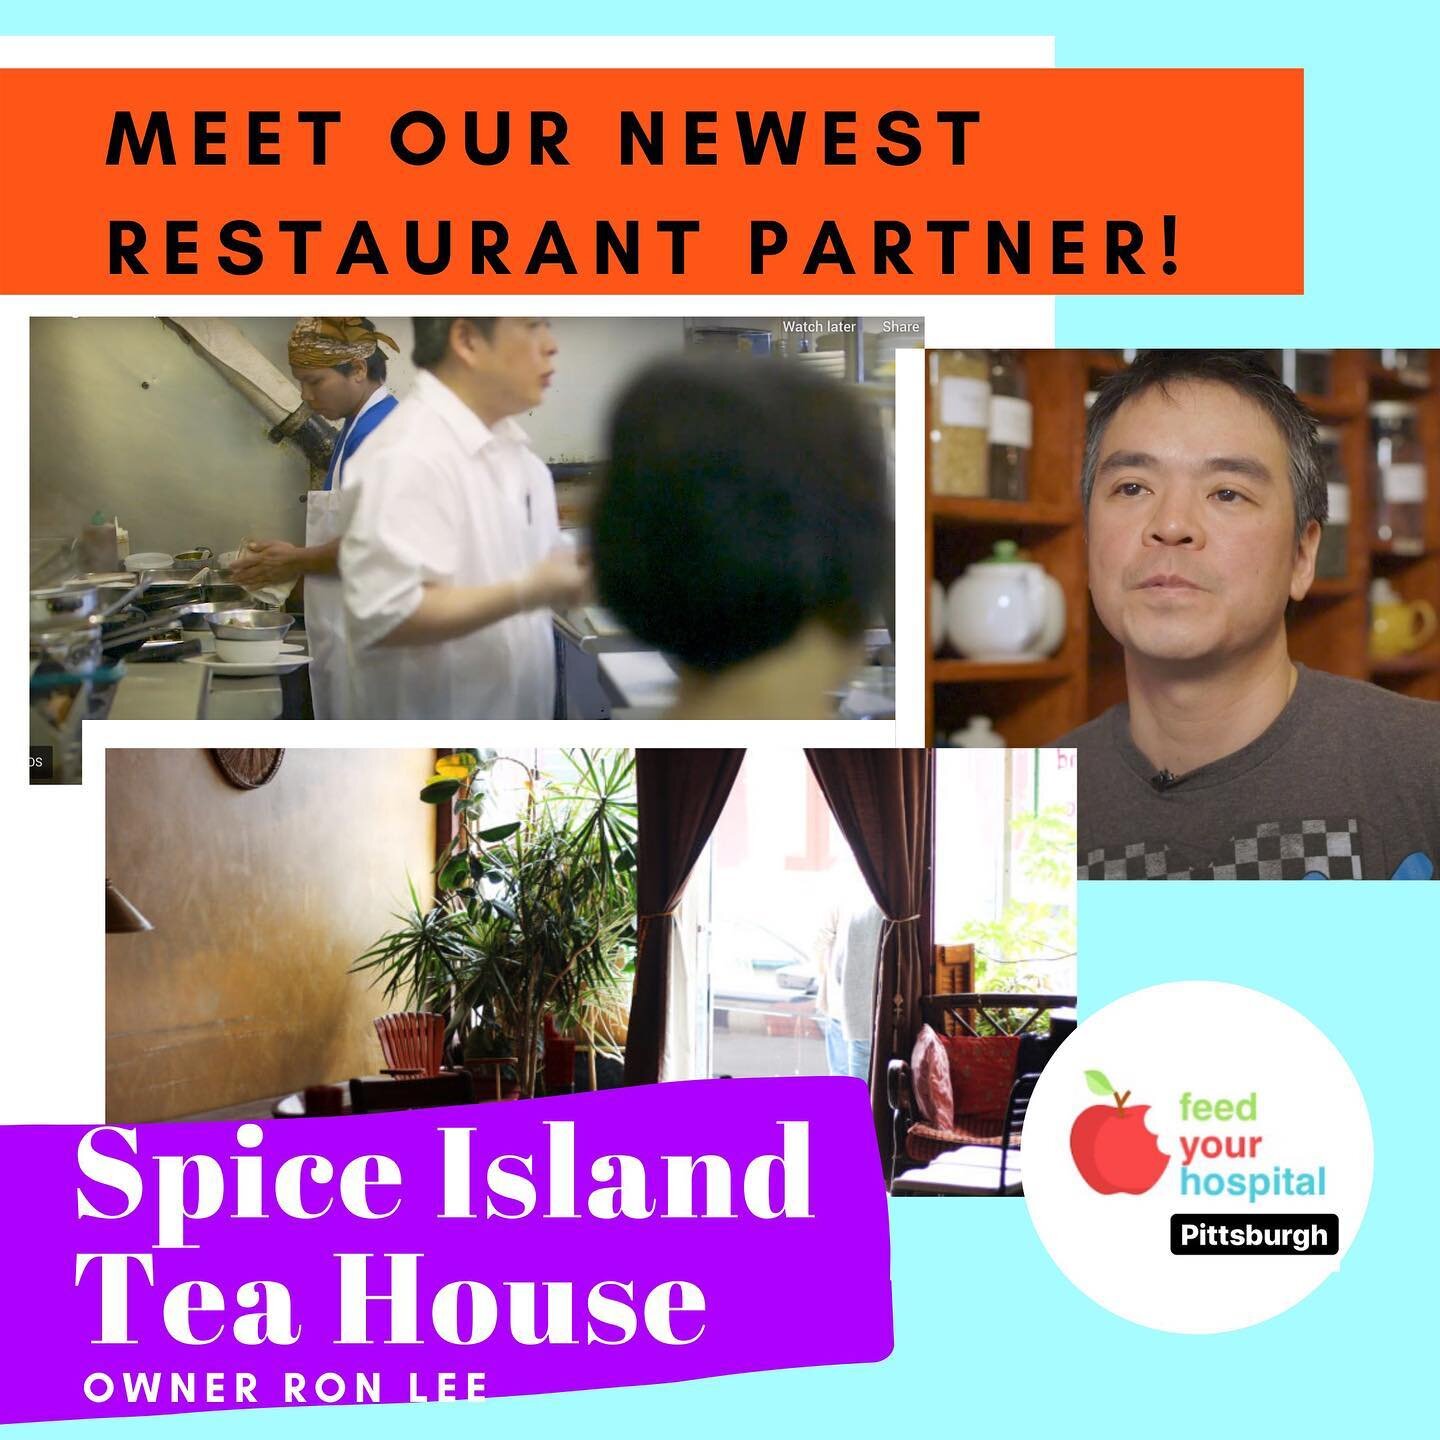 Thrilled to announce our newest restaurant partner, @spiceislandteahouse! Ron and Spice Island have been a beloved staple for Pittsburgh locals and students alike since 1995. They&rsquo;re holding down the fort during COVID19 and we are so excited to